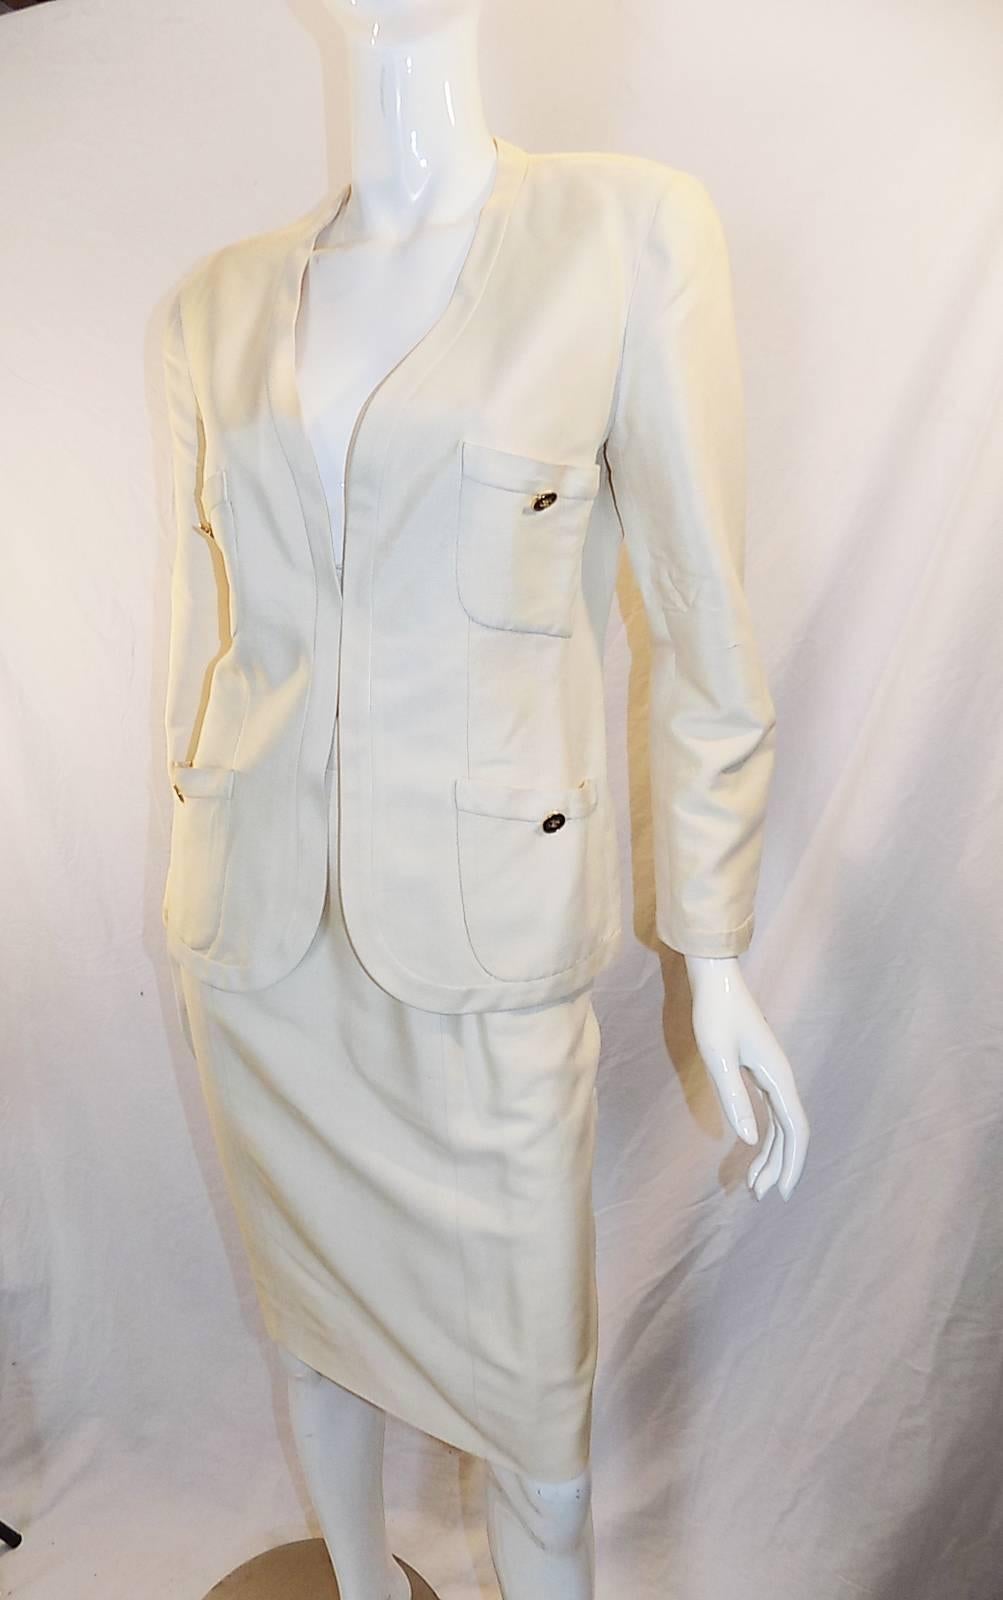 Perfect summer Chanel suit. Shantung silk.  Both pieces are great to be worn separately. Suit is very versatile. It looks extremely elegant worn as is with little blouse or camisole or separately. Jacket could be paired up with jeans or just about